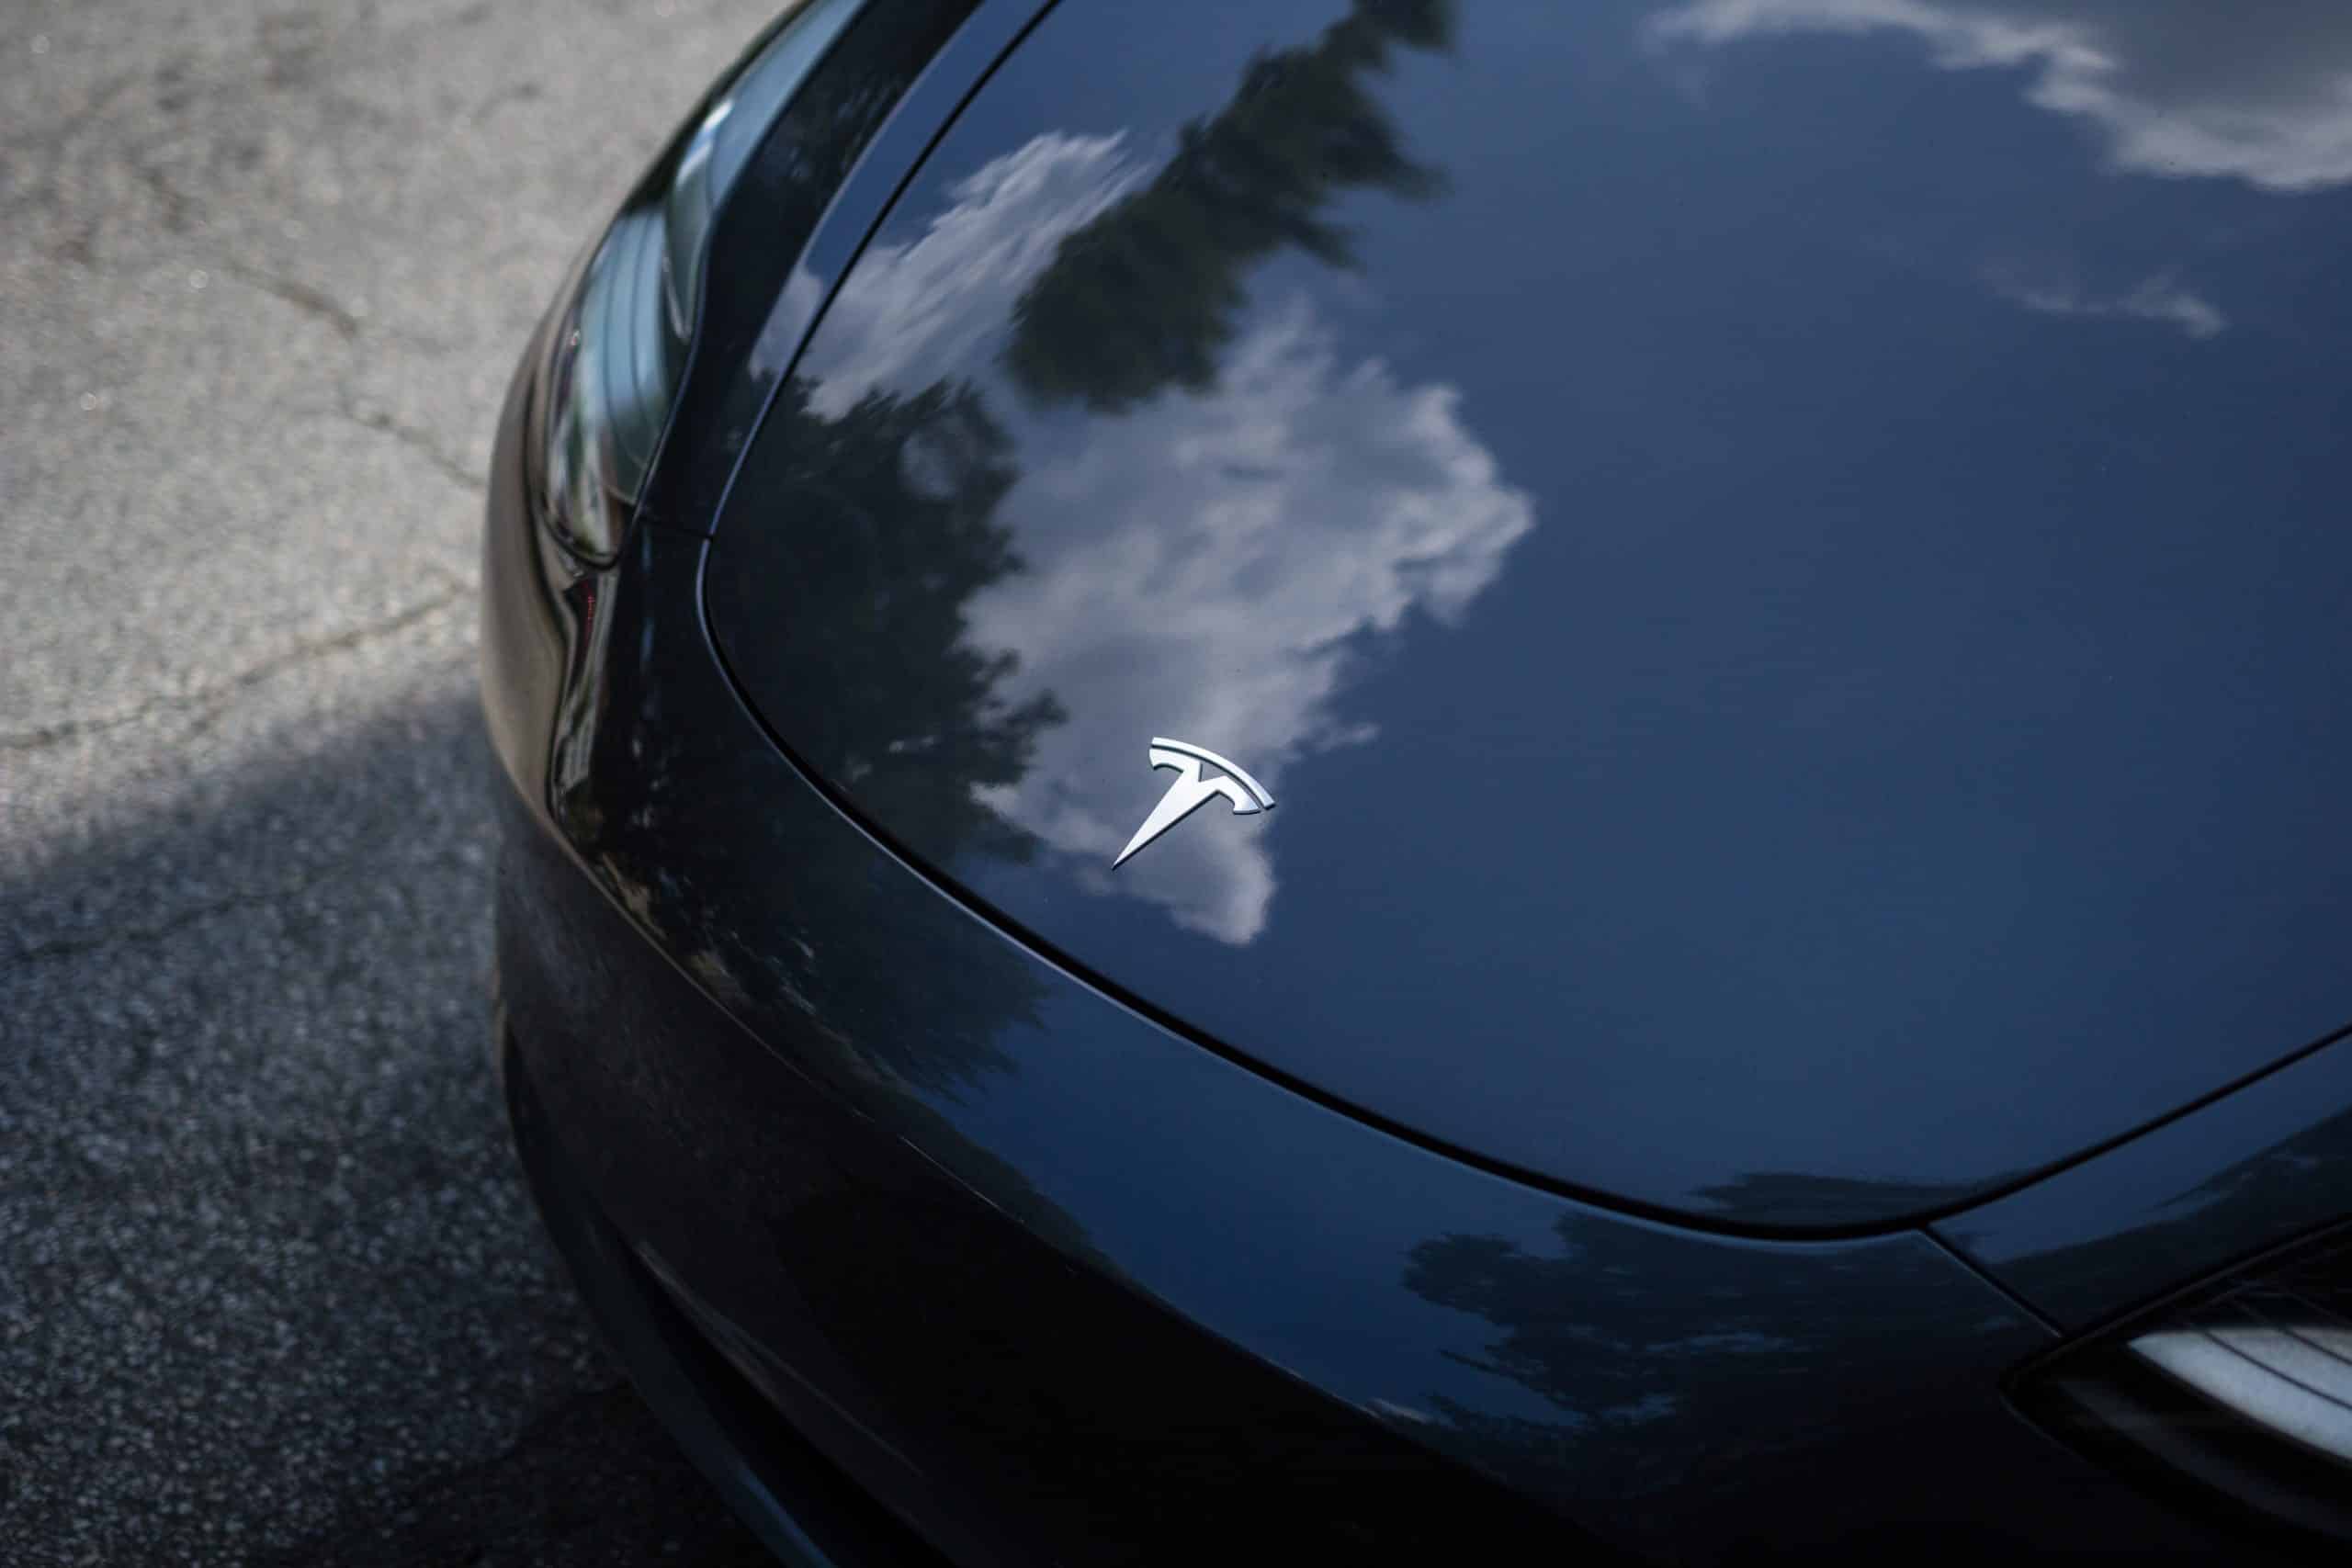 Paint Protection Film (PPF) and Tesla: The Ultimate Shield?